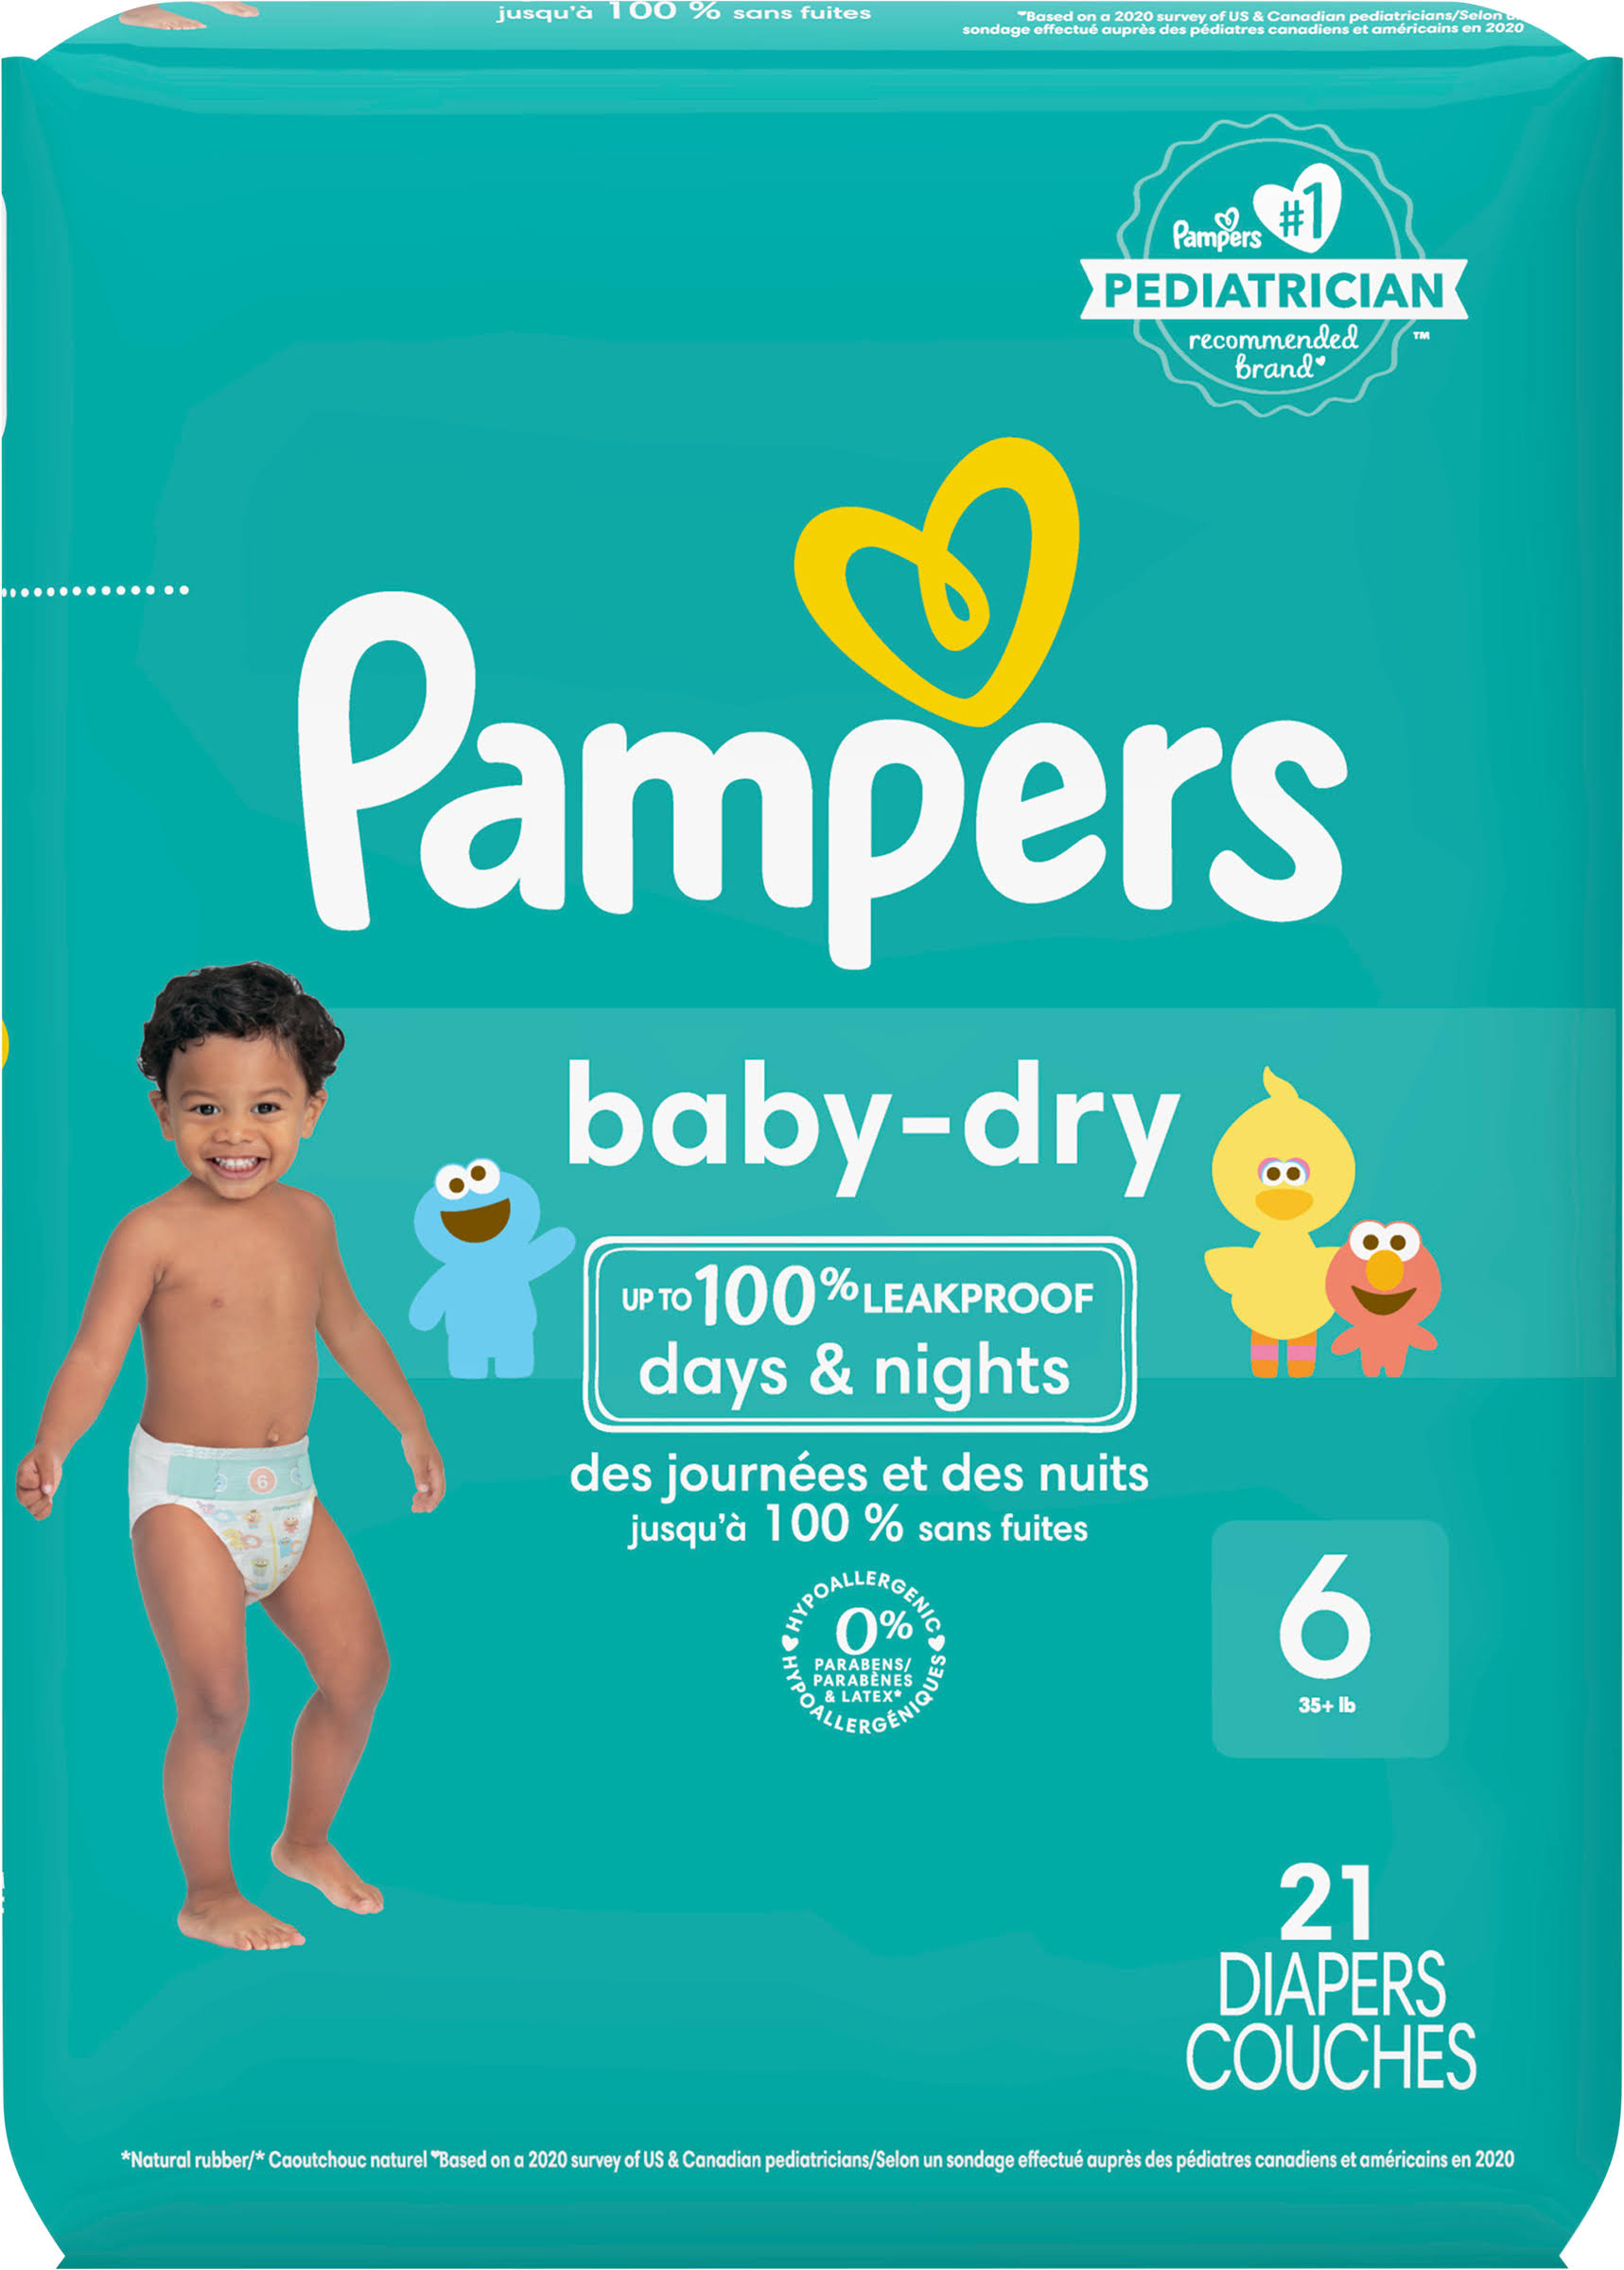 Pampers Baby Dry Diapers - Size 6, 21ct